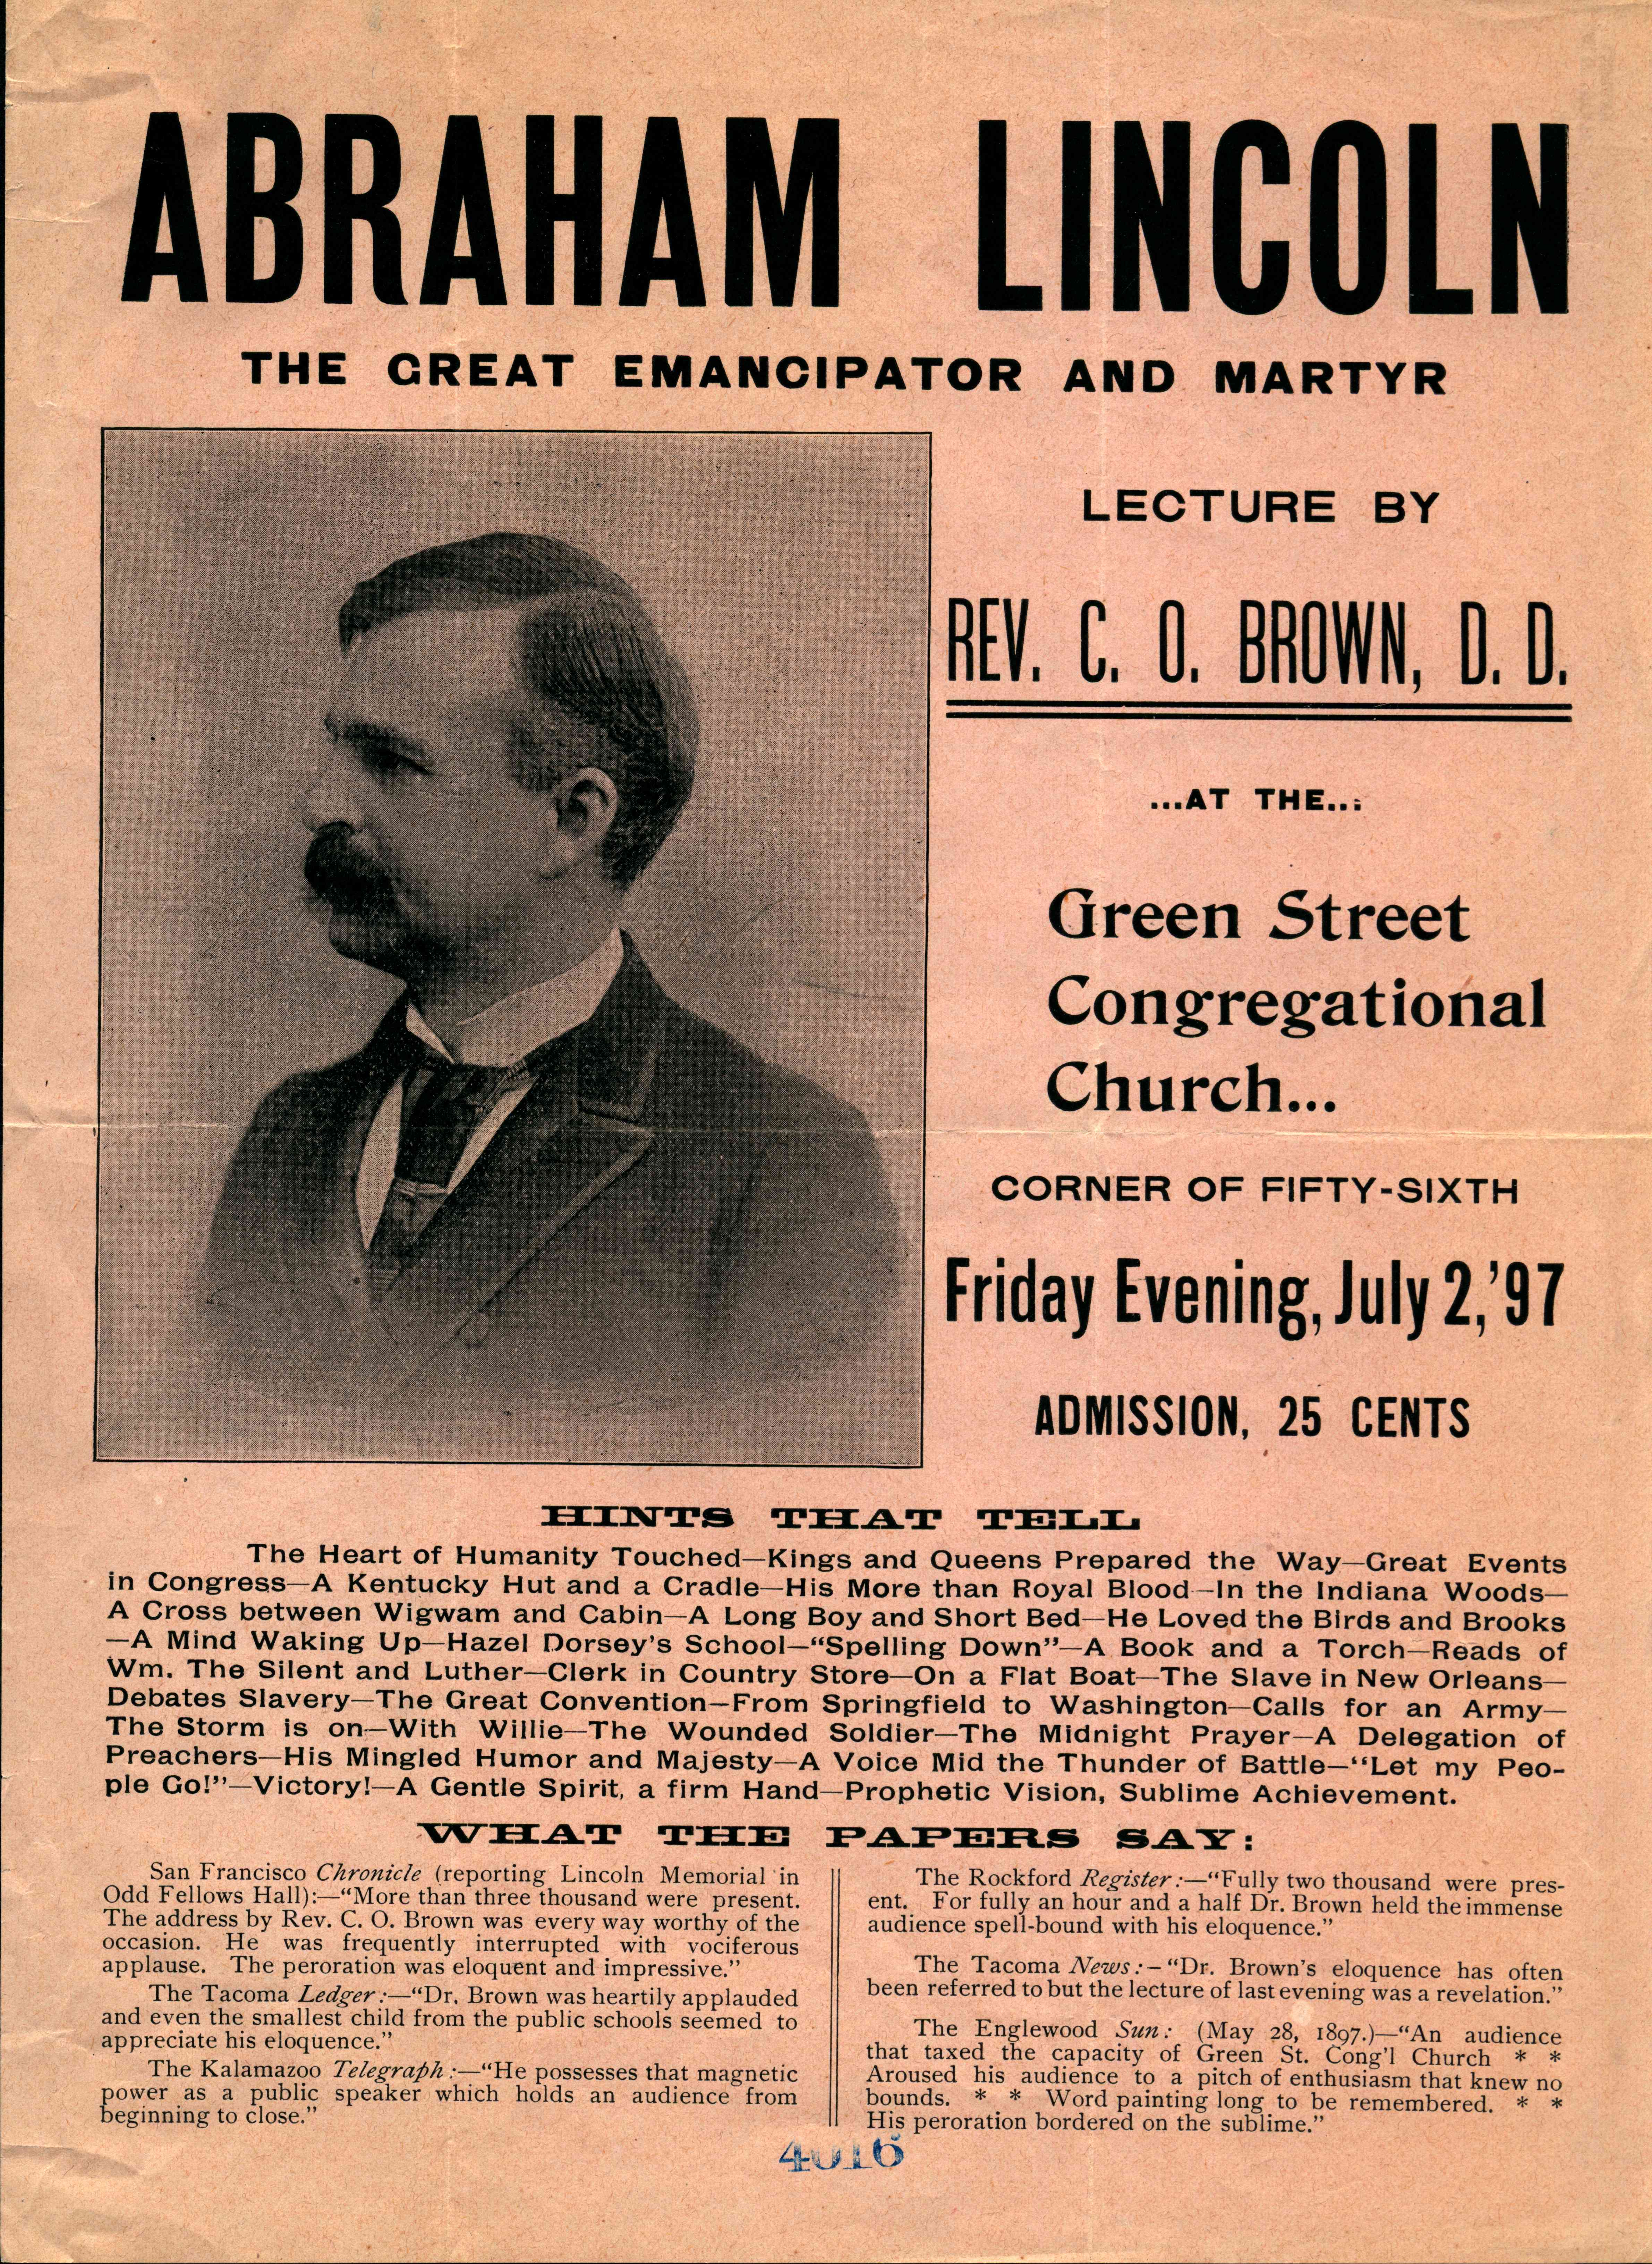 Portrait of Rev. C.O. Brown to the right, with speech information on the left and testimonials below